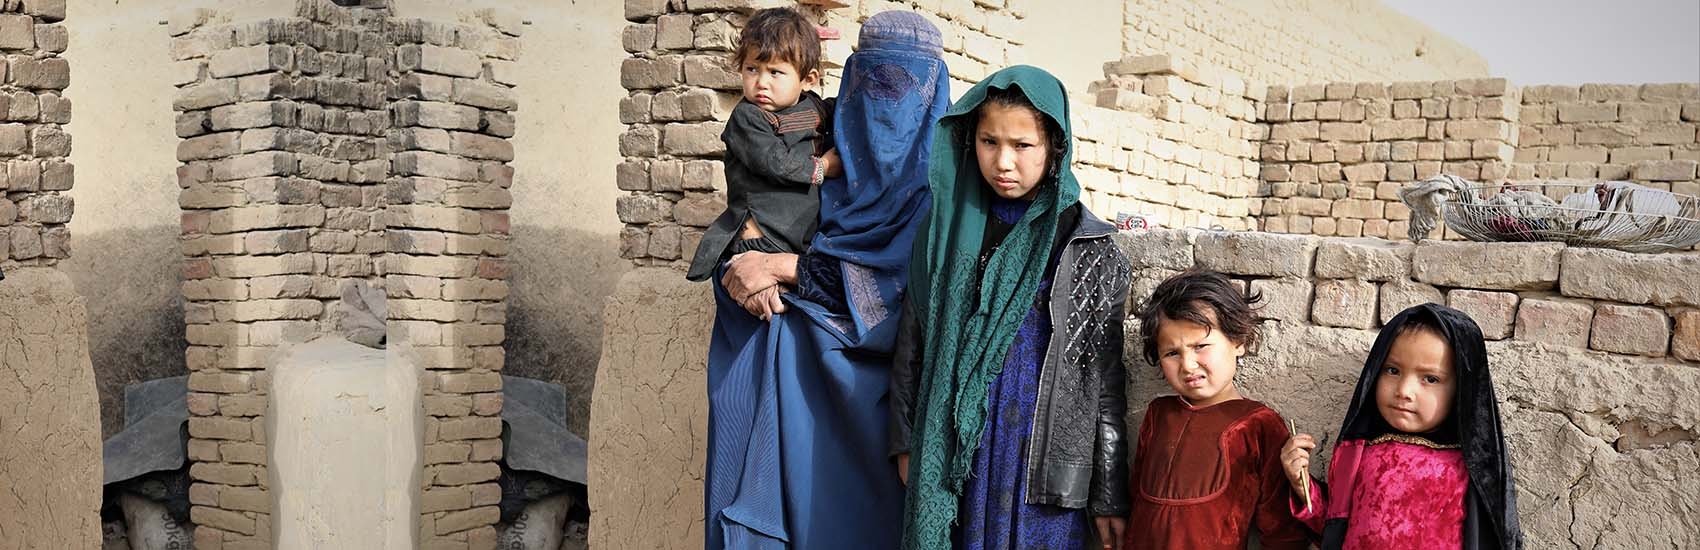 In Afghanistan, a mother holds her baby while standing next two her three daughters in front of a crumbling brown brick wall.